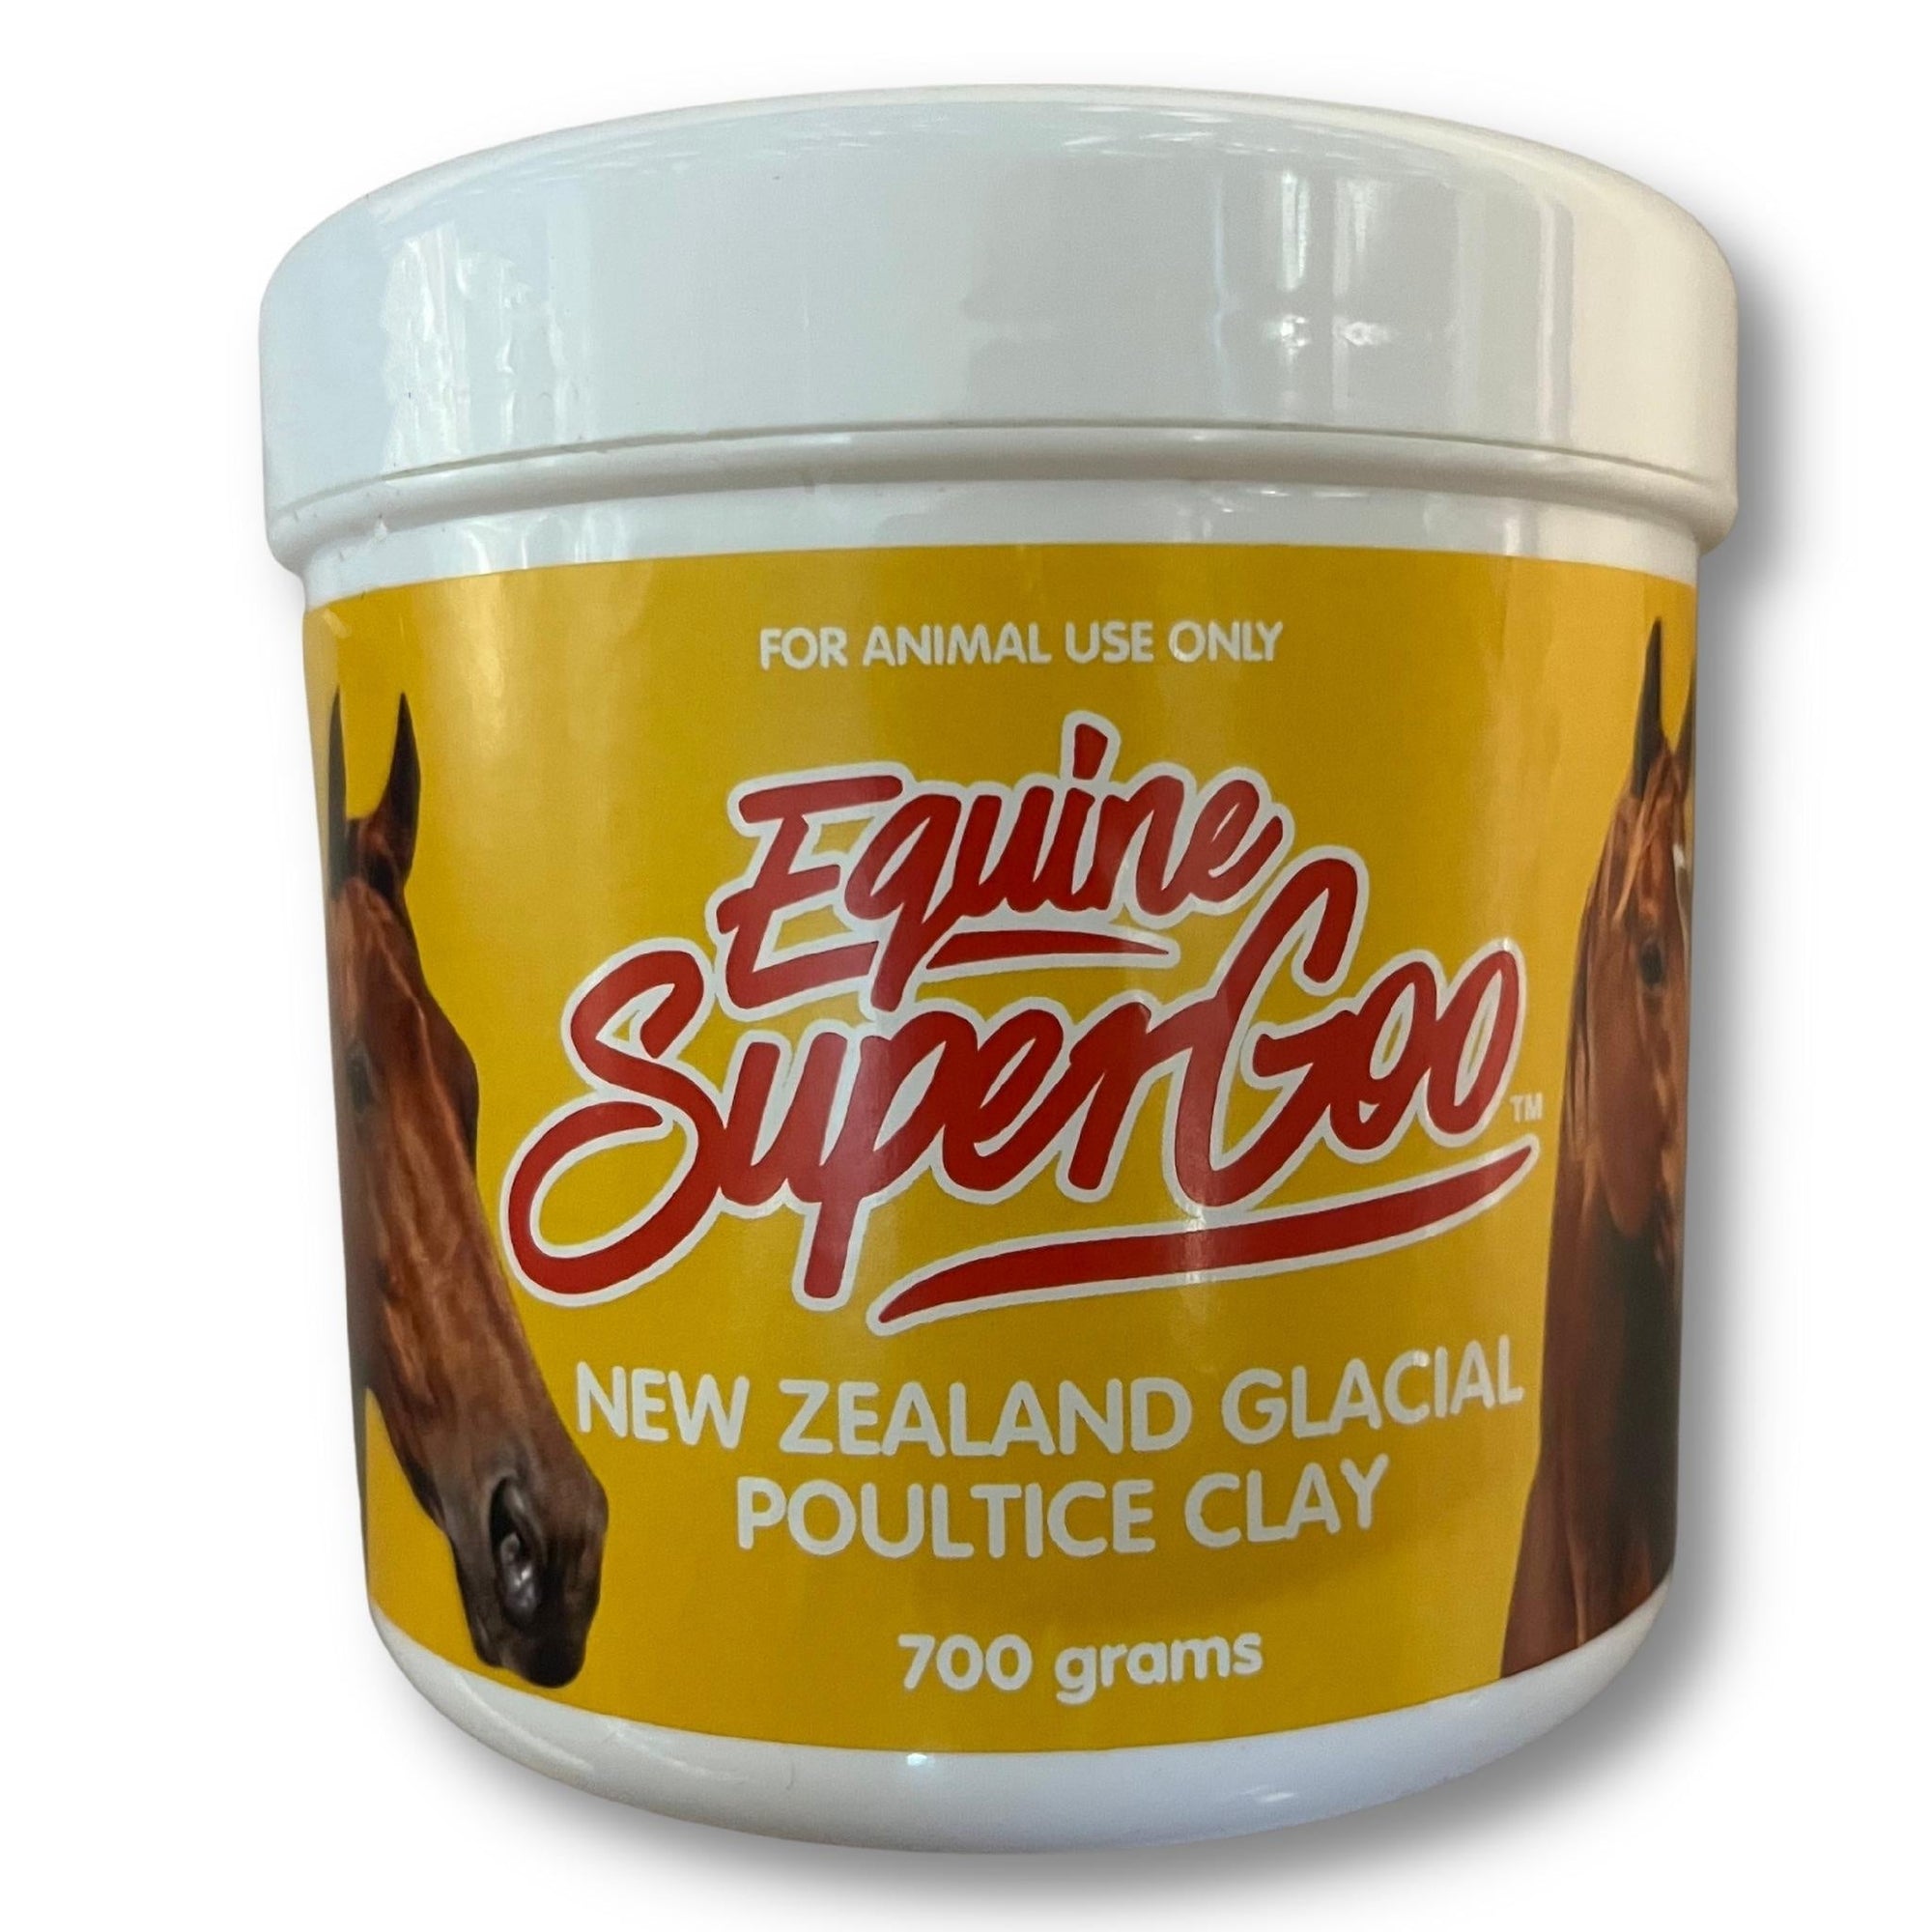 New-Zealand-Glacial-Poultice-Clay-The-Horse-Rug-Whisperer